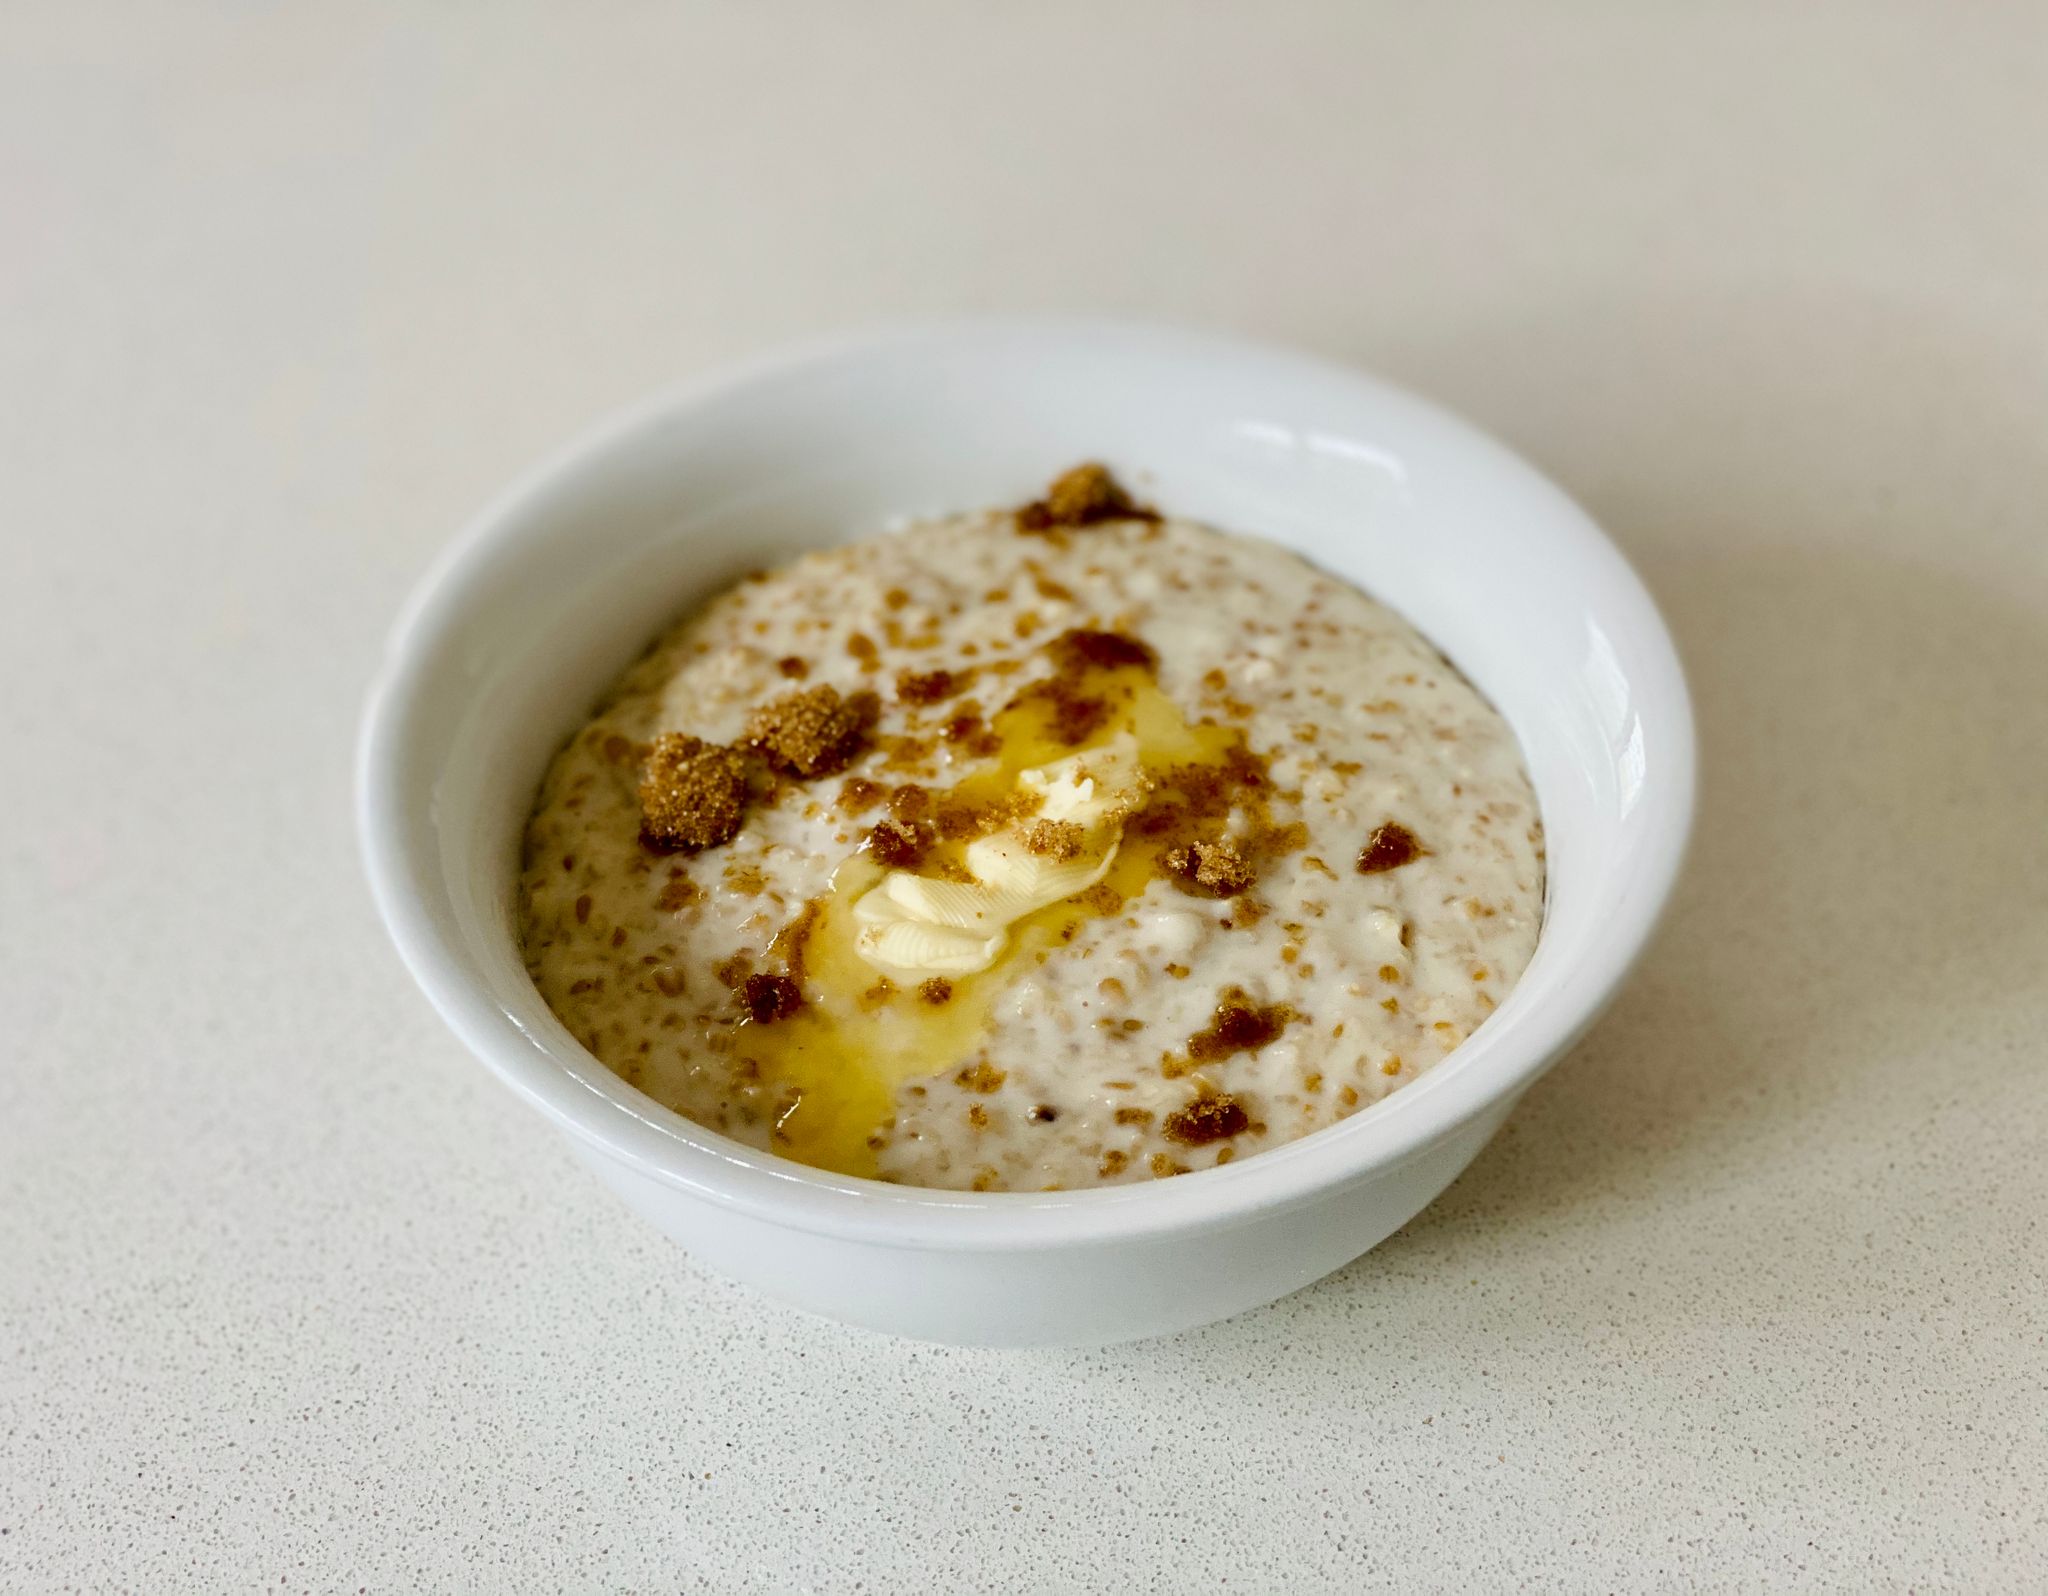 A photo of a bowl of porridge topped with a dollop of butter and a sprinkling of brown sugar.